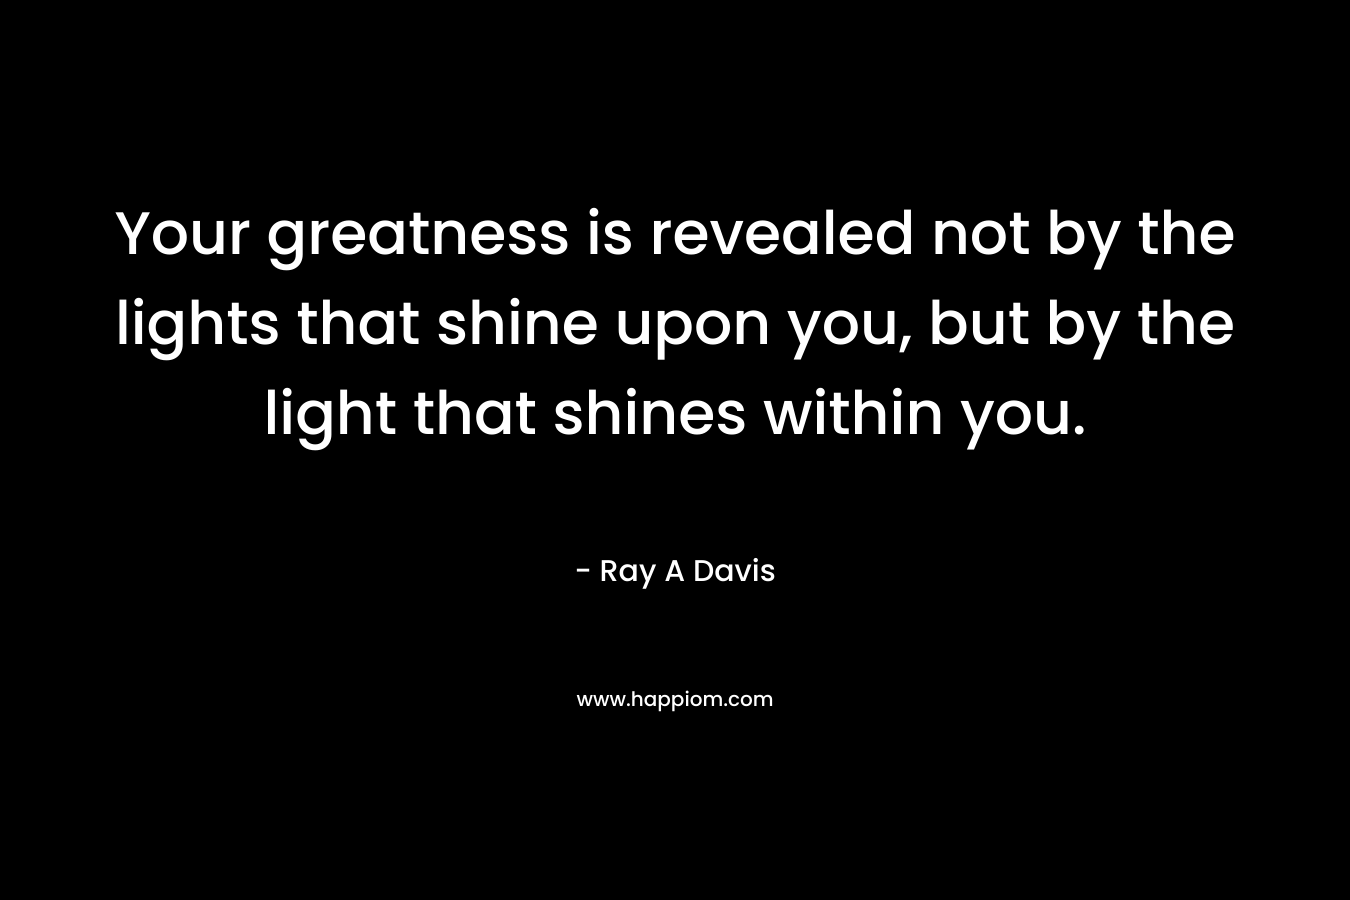 Your greatness is revealed not by the lights that shine upon you, but by the light that shines within you. – Ray A Davis